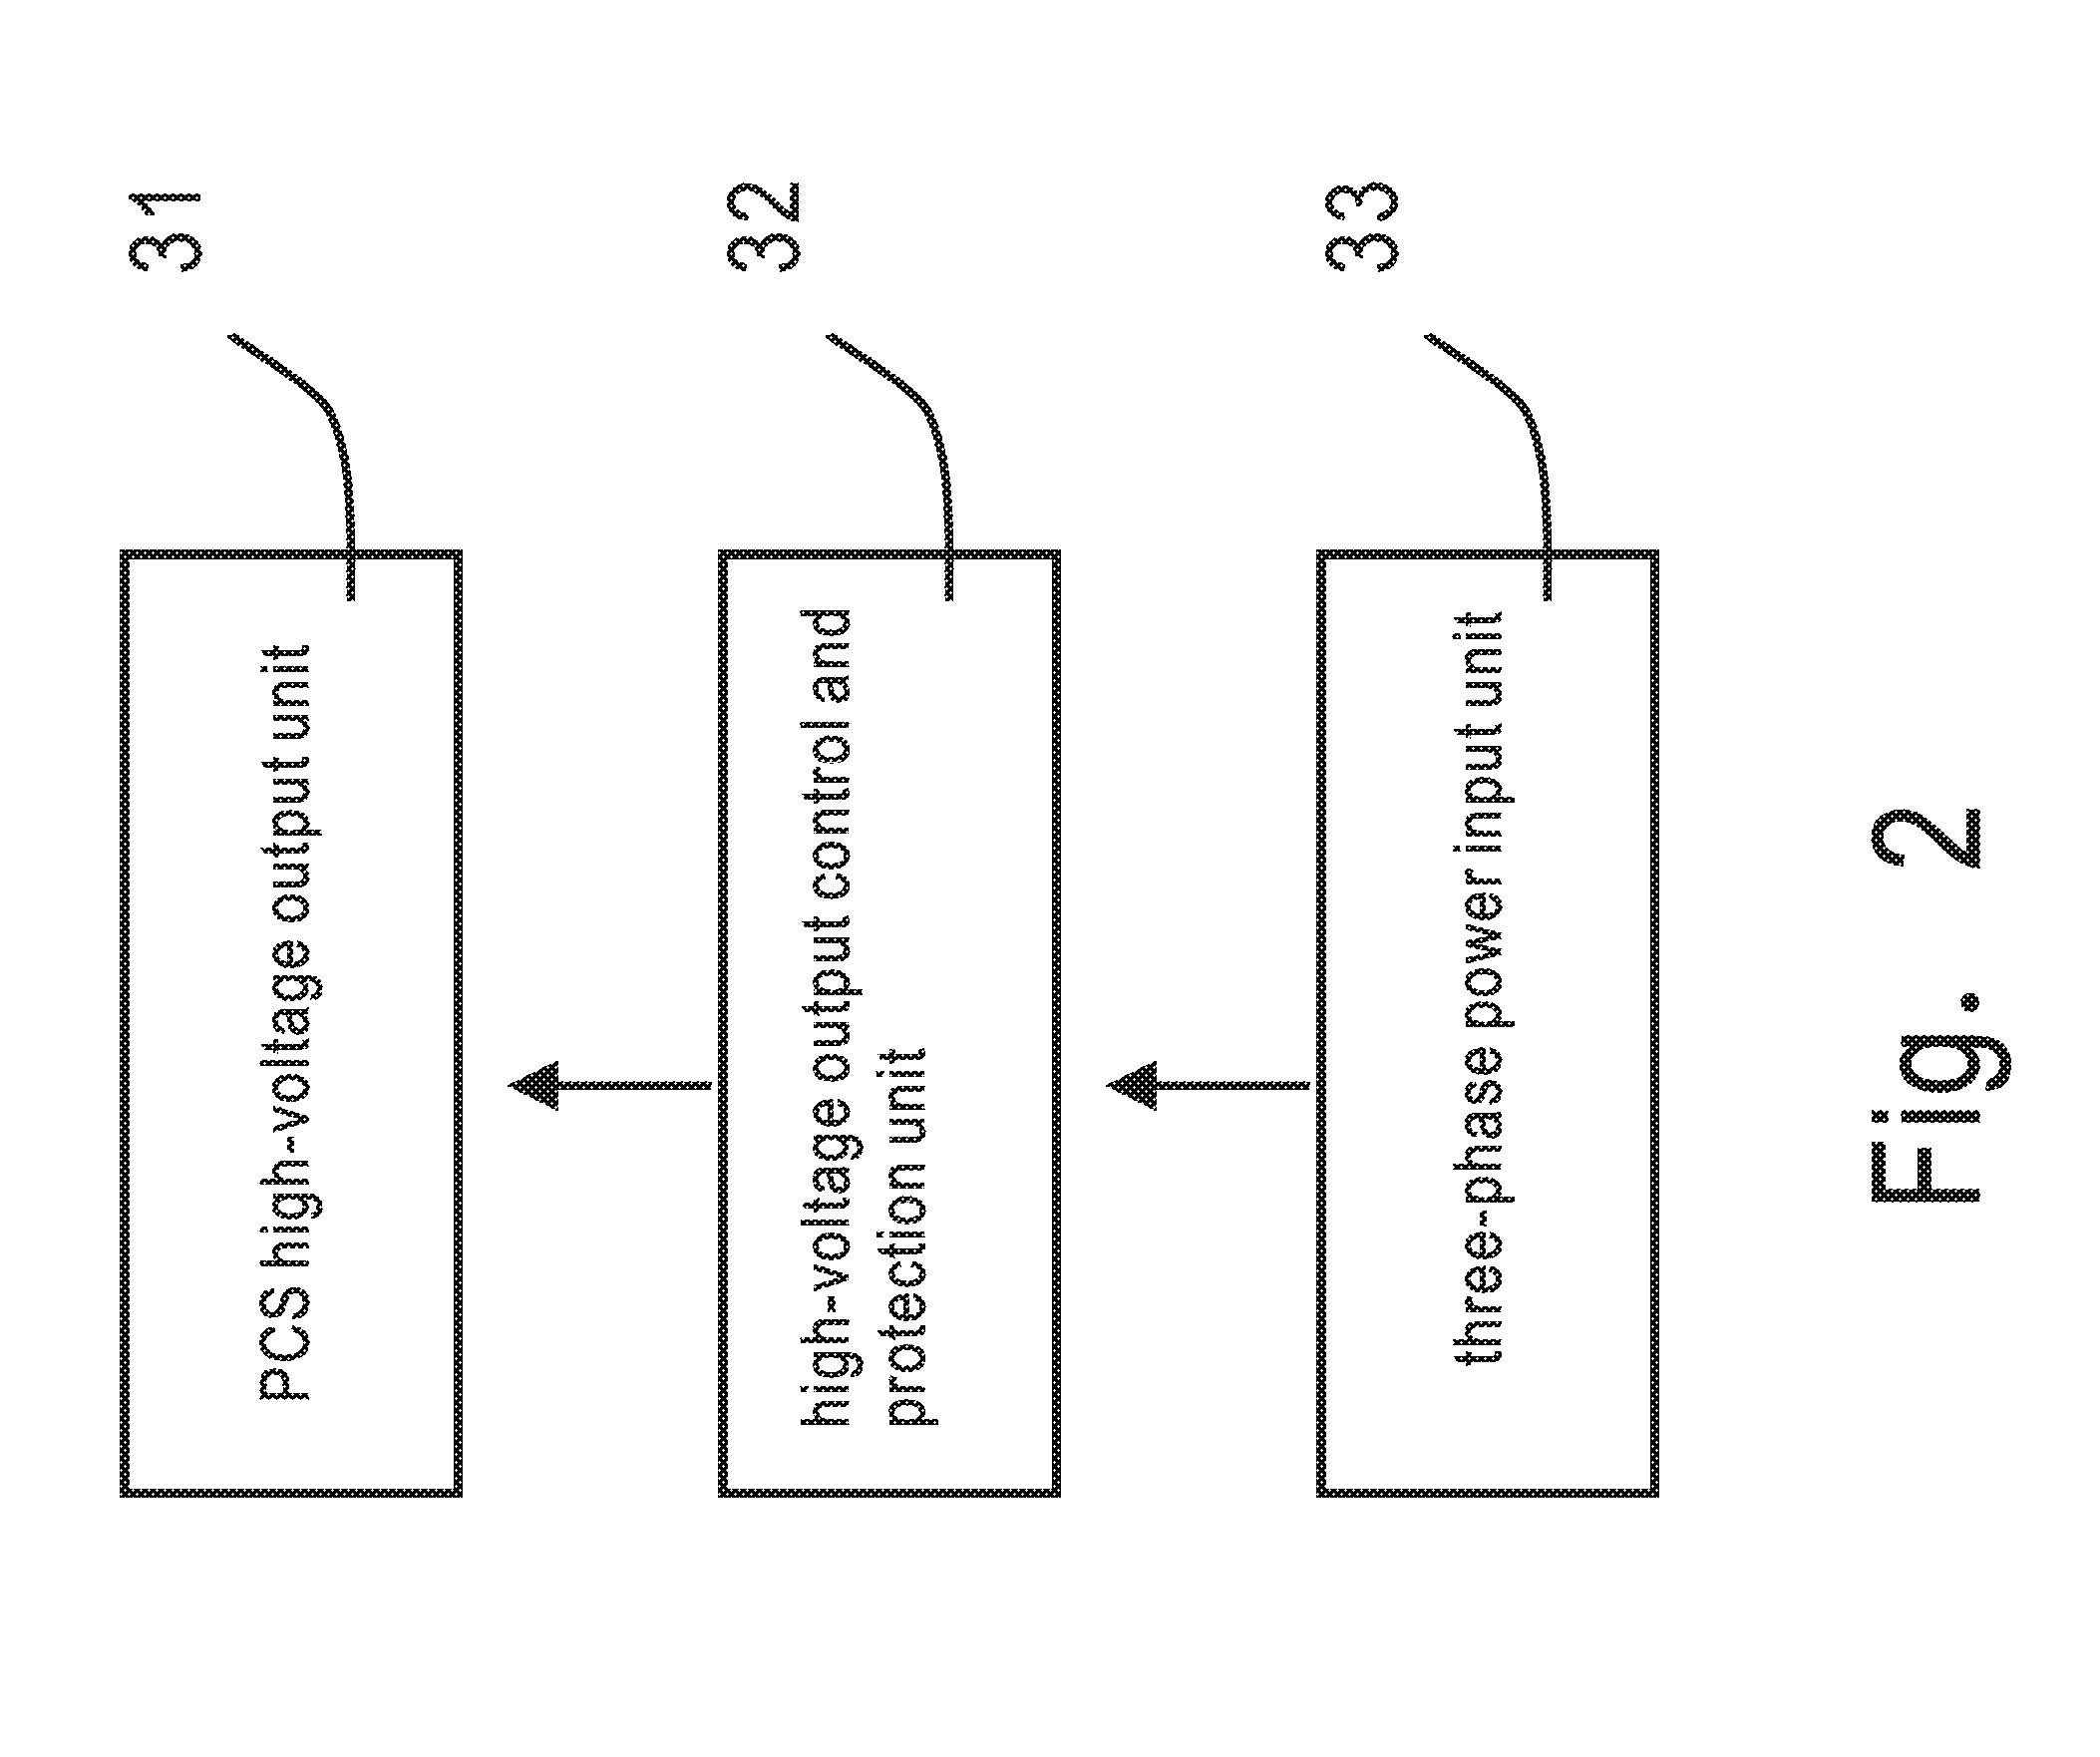 Pre-charging and pre-discharging device for energy storage system